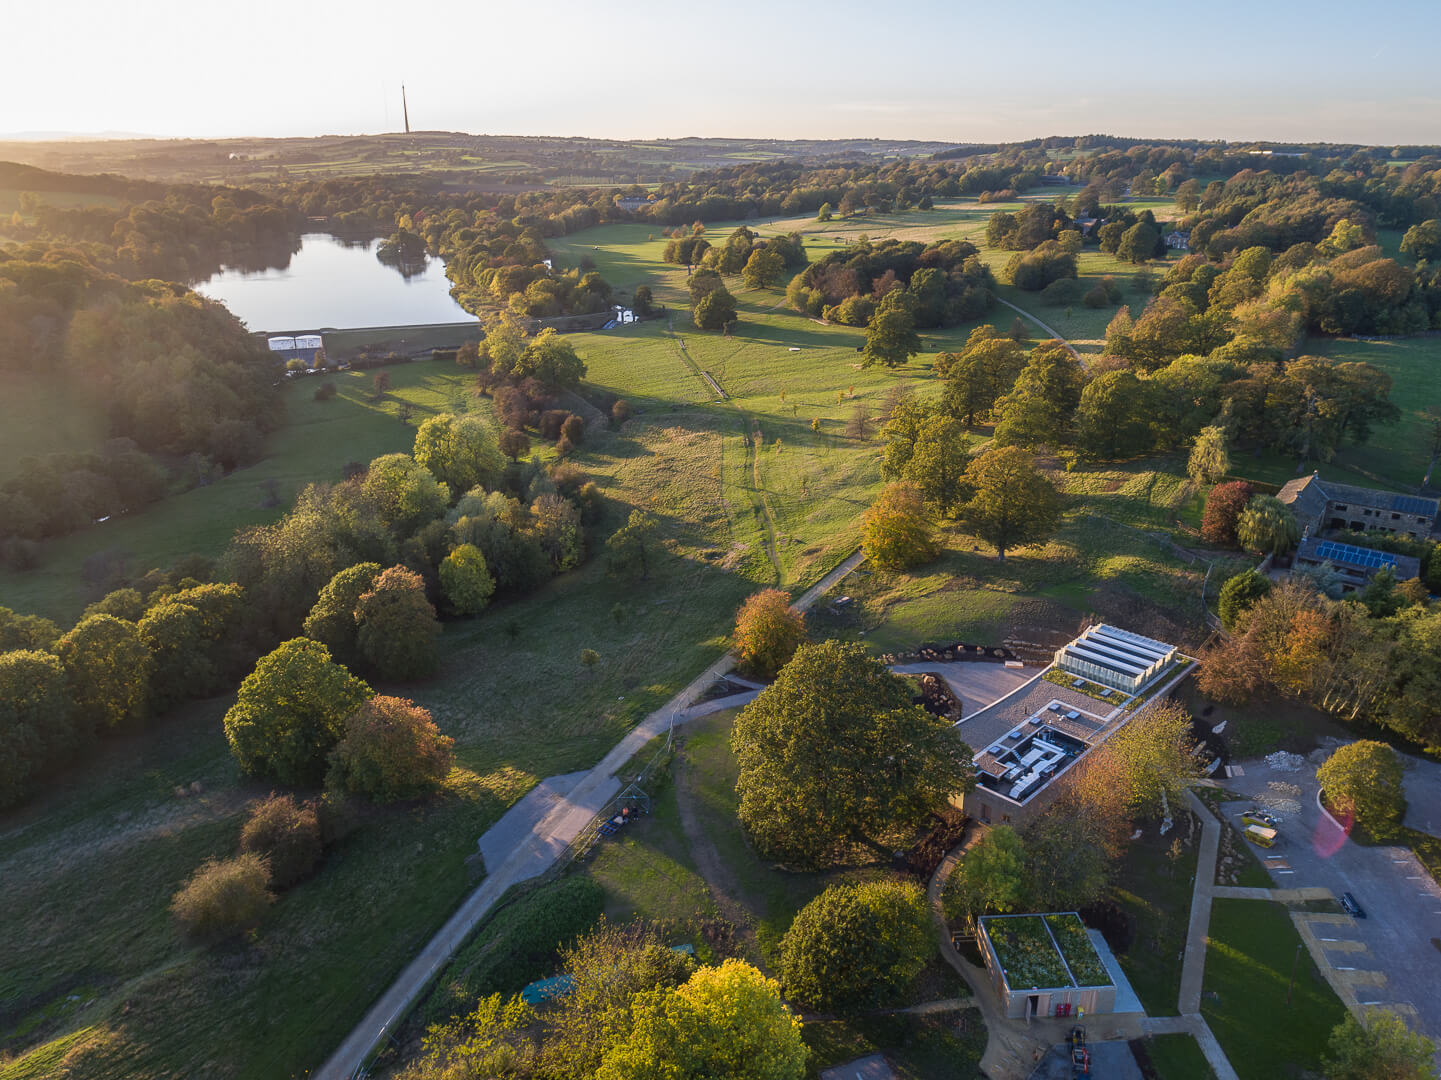 Midi Photography - Aerial drone photography at The Weston, Yorkshire Sculpture Park for William Birch & Son